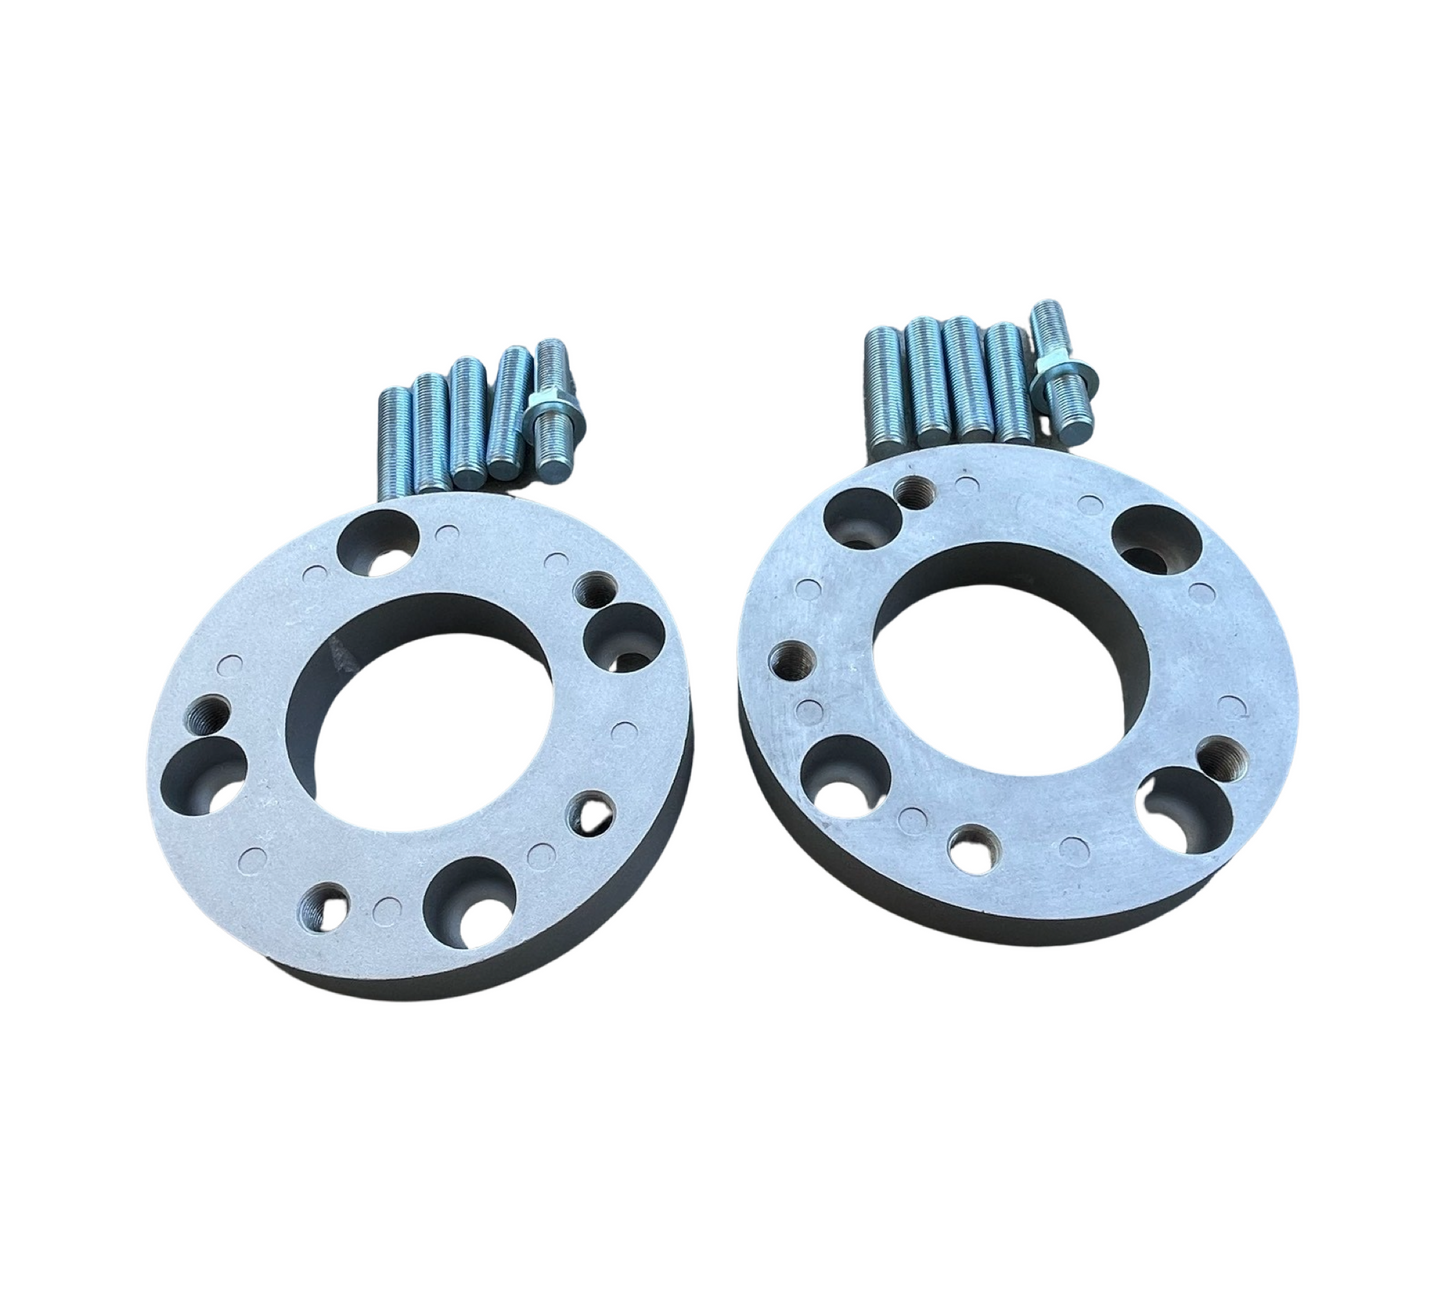 Wheel Adapter, 4-Lug to 5-Lug - Sierra Madre Collection